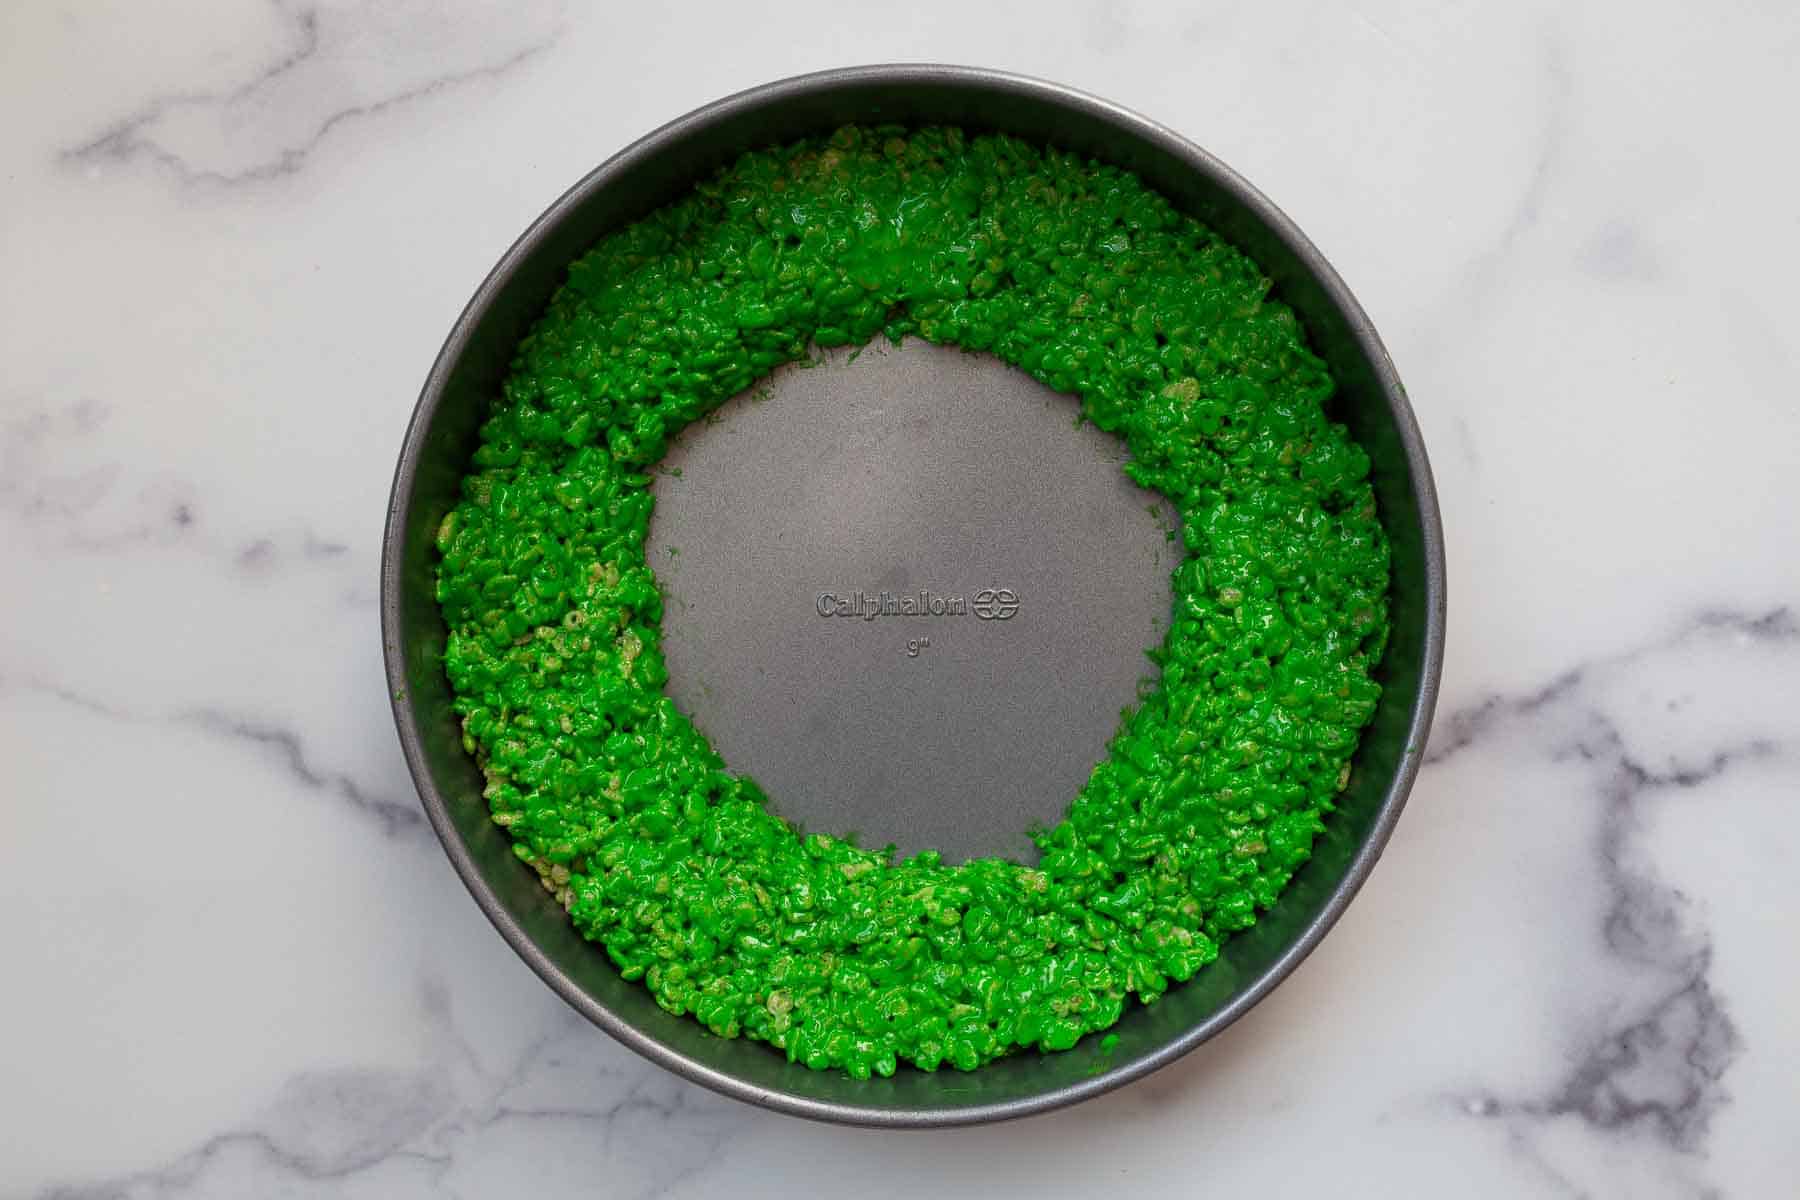 Ring of green rice cereal treats in a round cake pan.